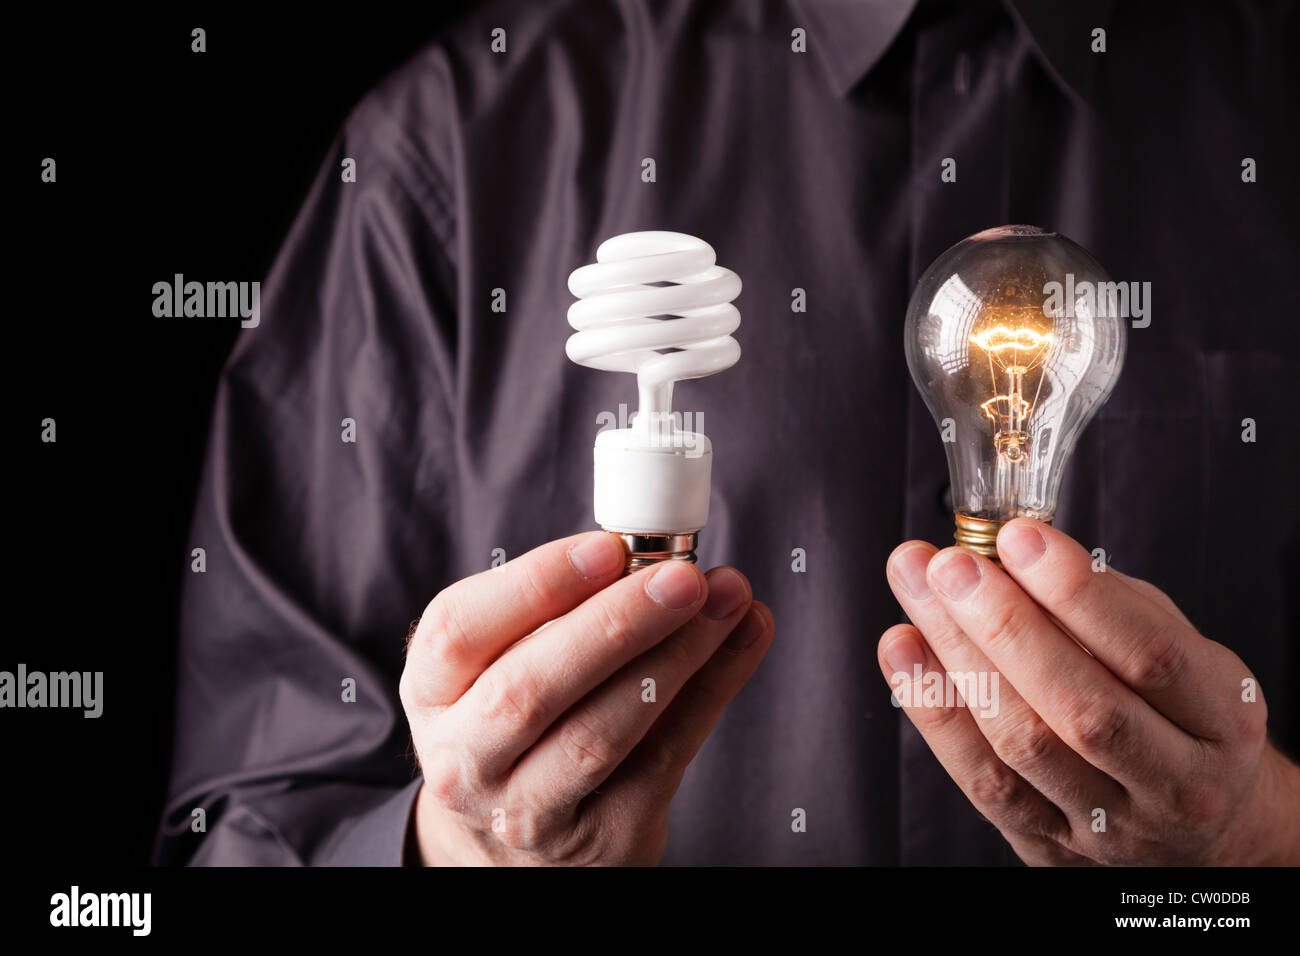 Making a choice between incandescent and fluorescent light source Stock Photo